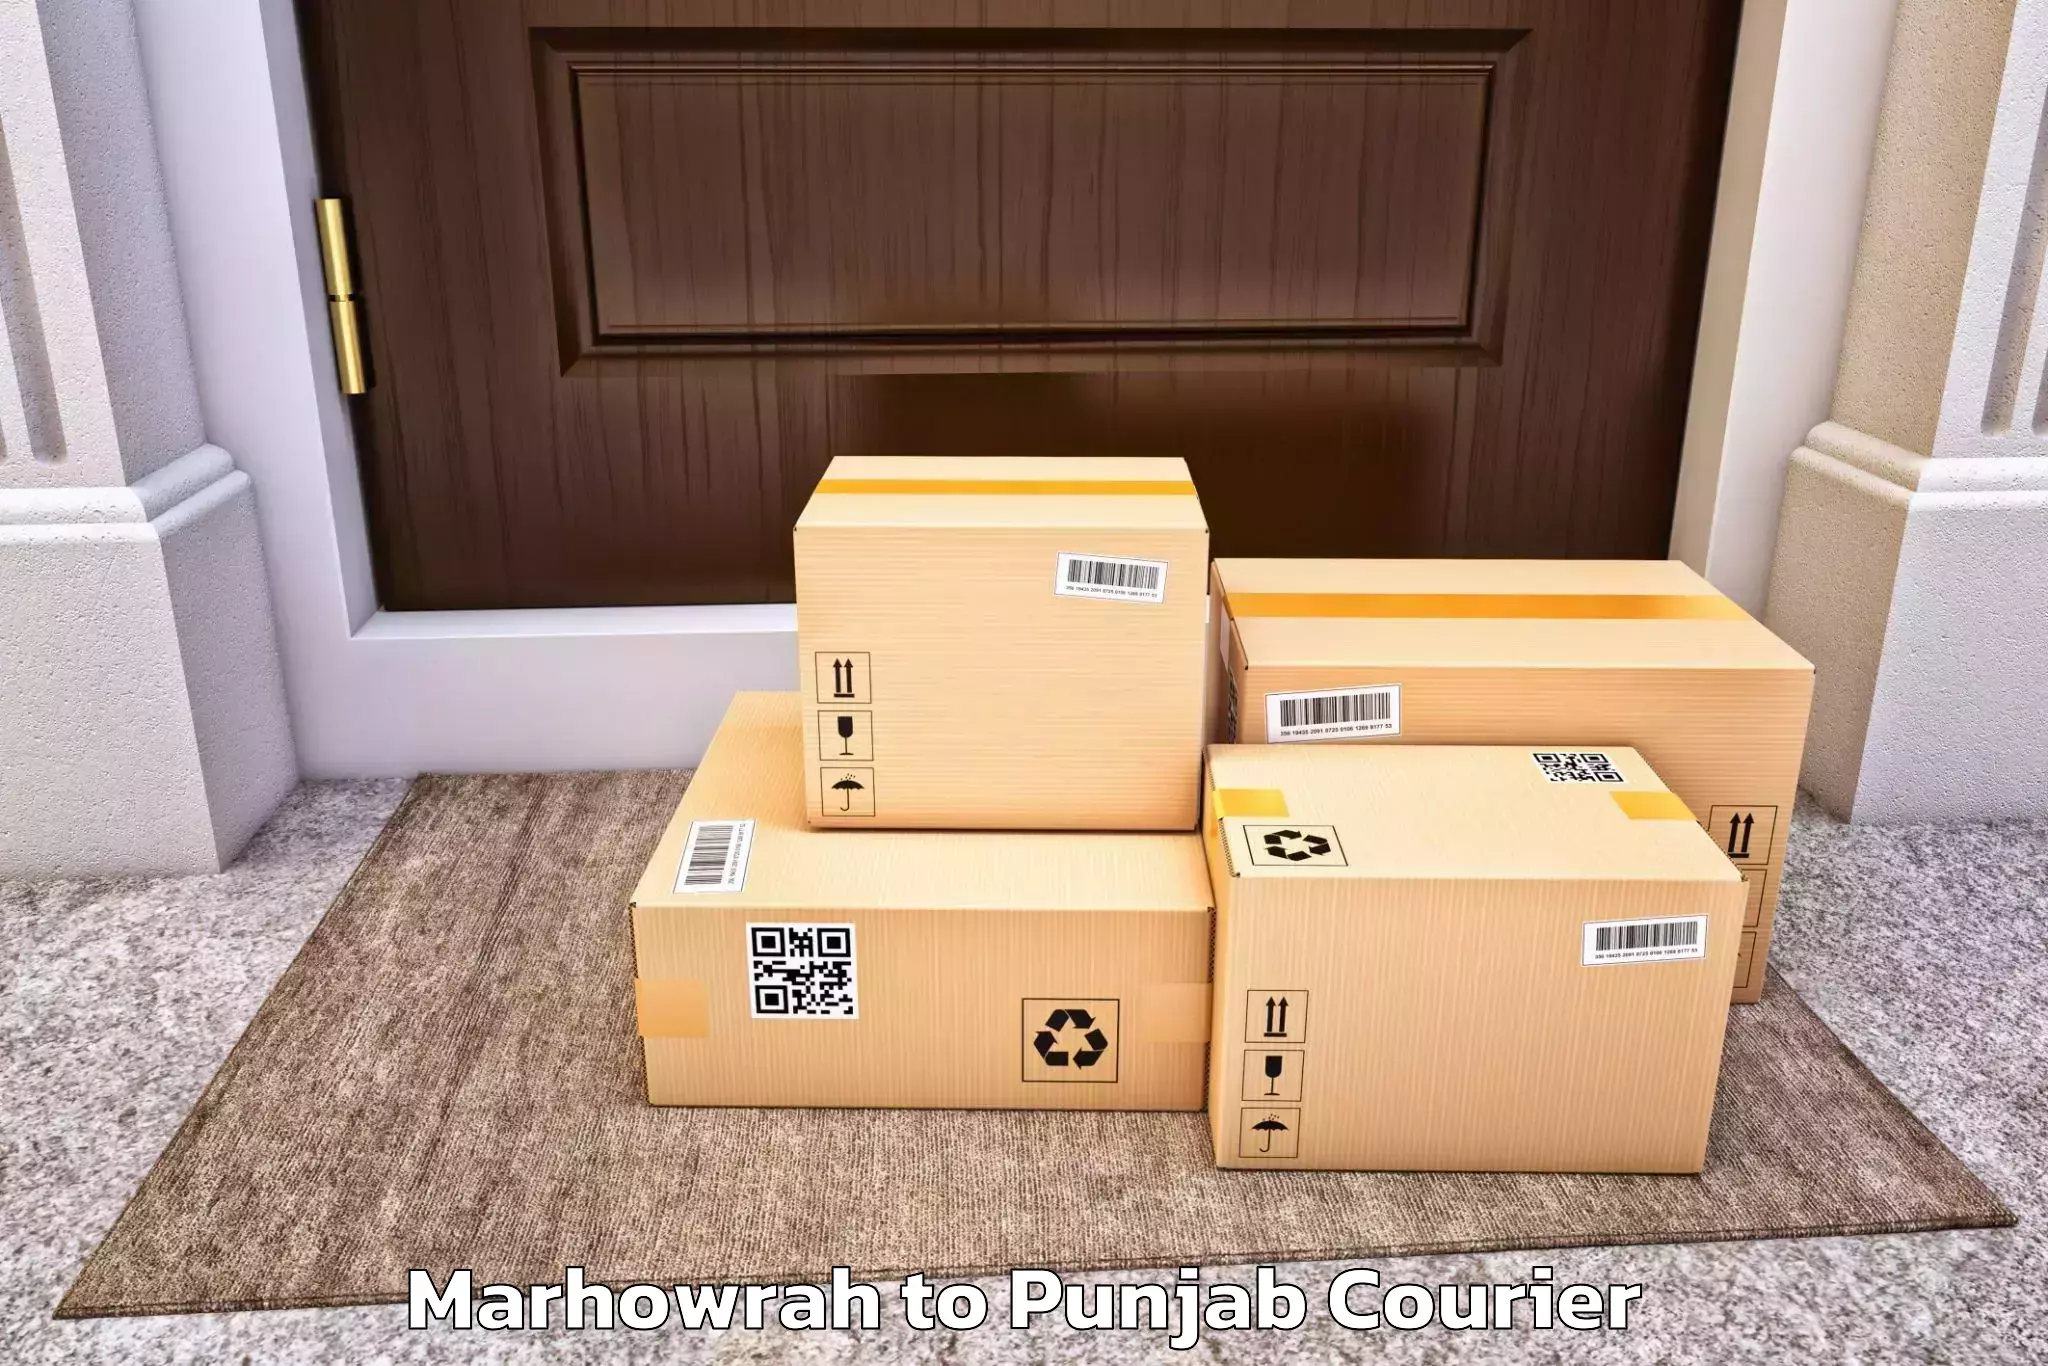 Cost-effective moving options Marhowrah to Amritsar